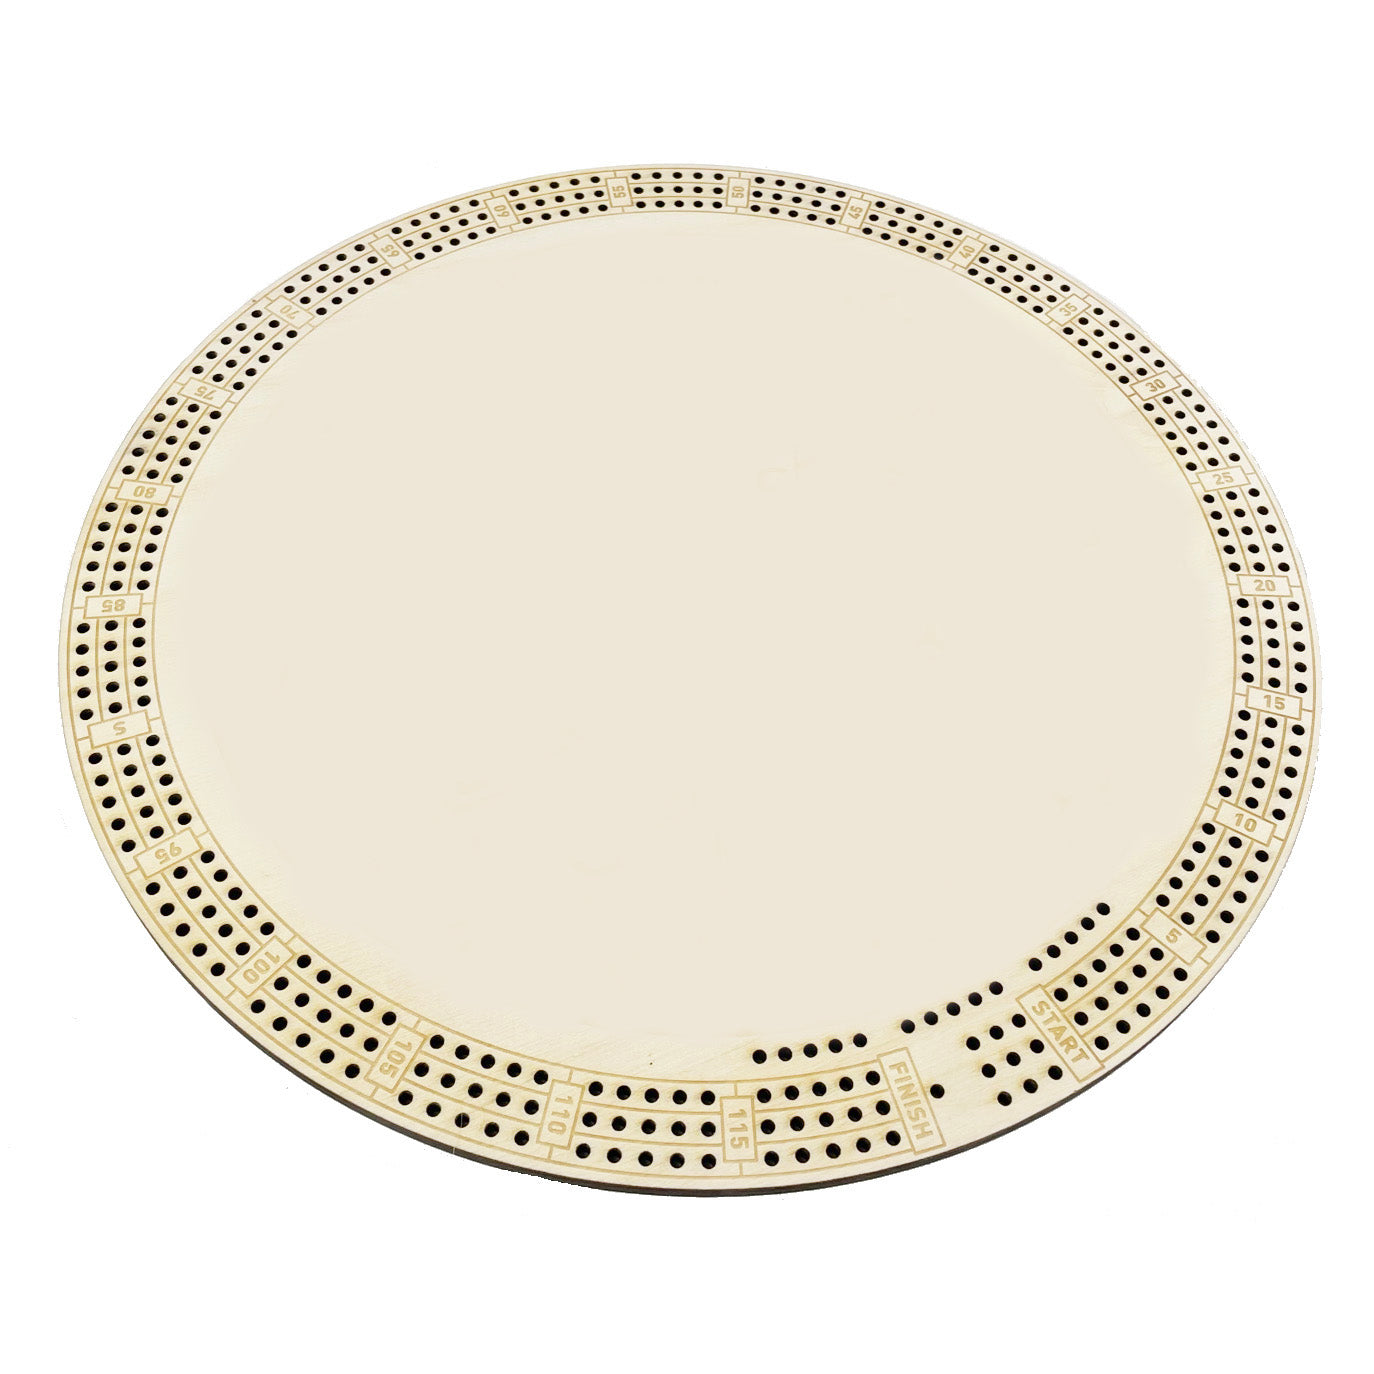 Round Cribbage Board Template